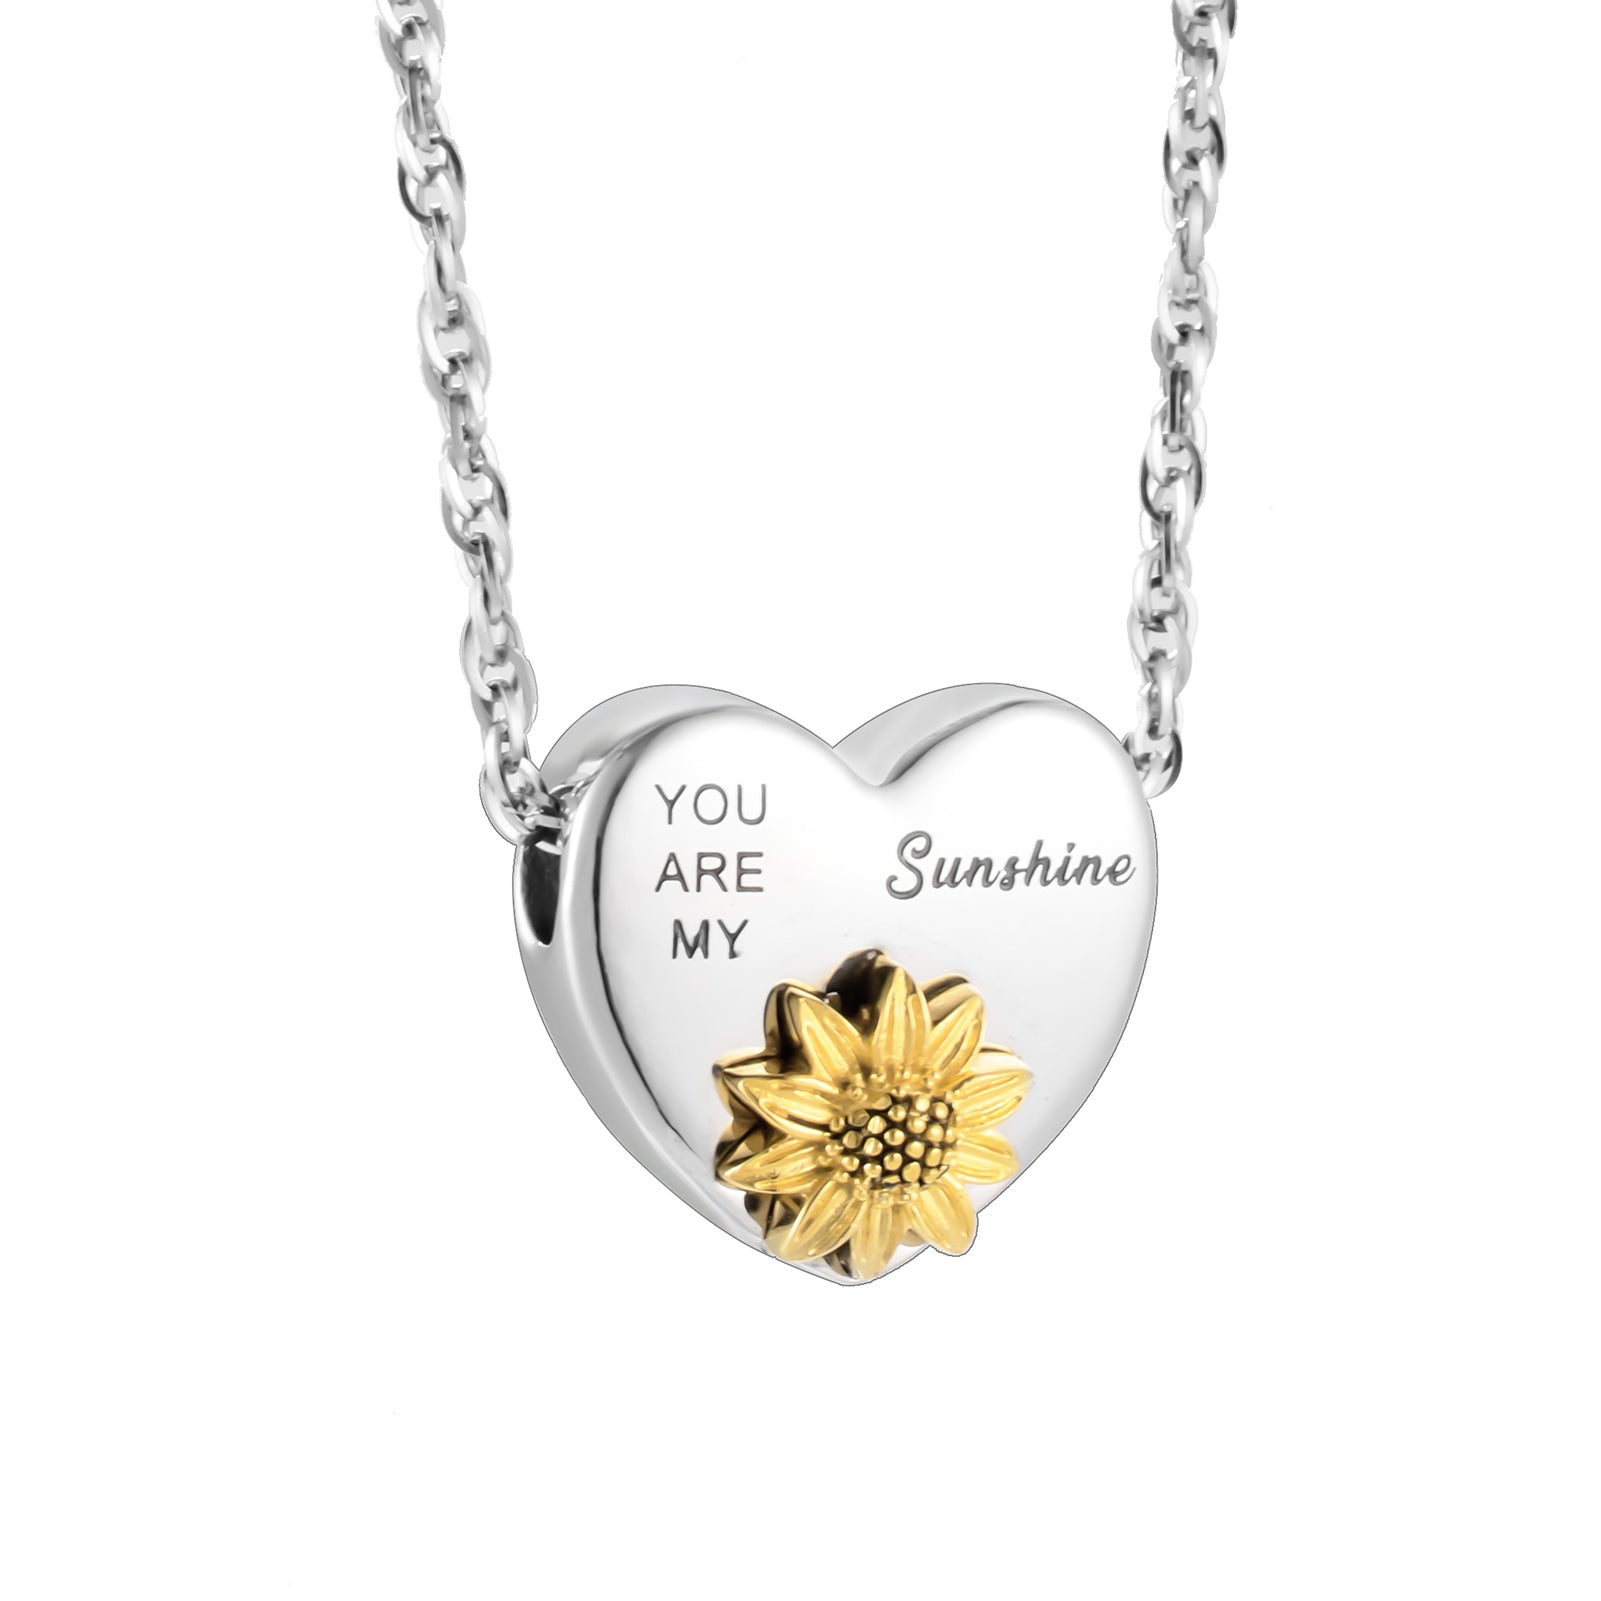 Heart Cremation Pendant Jewelry with Sunflower